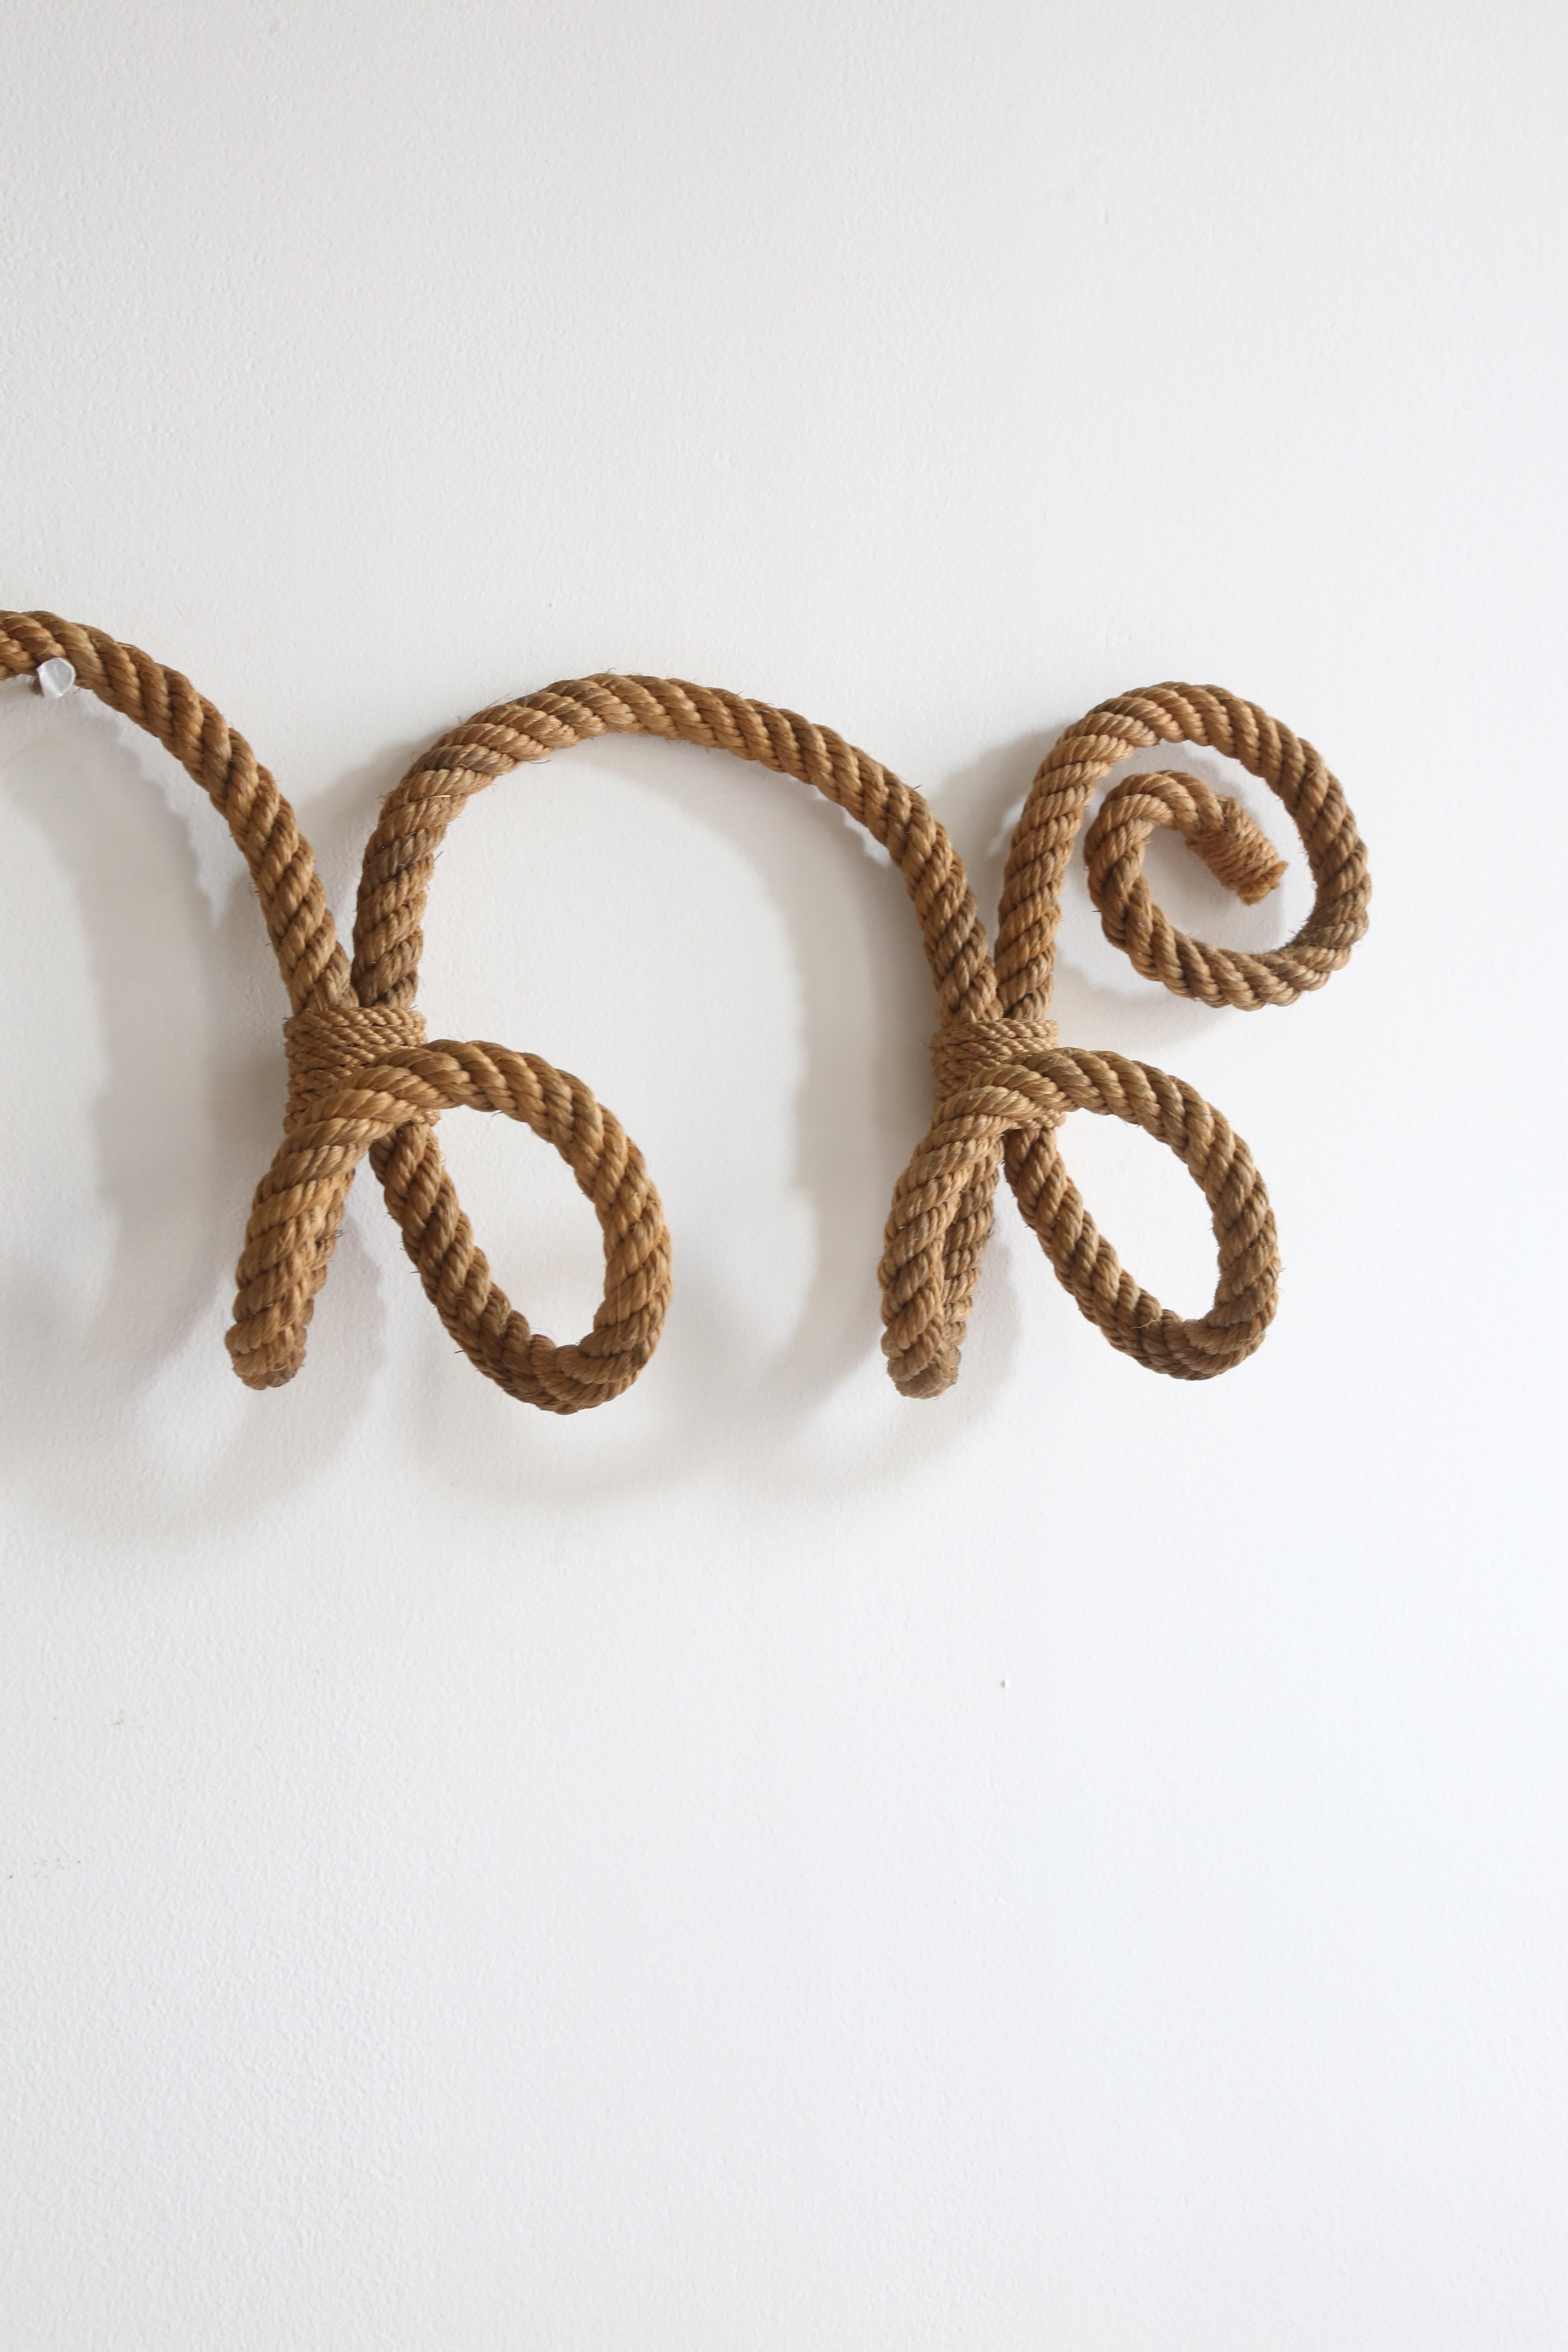 Rope Wall Hook by Audoux Minet 4